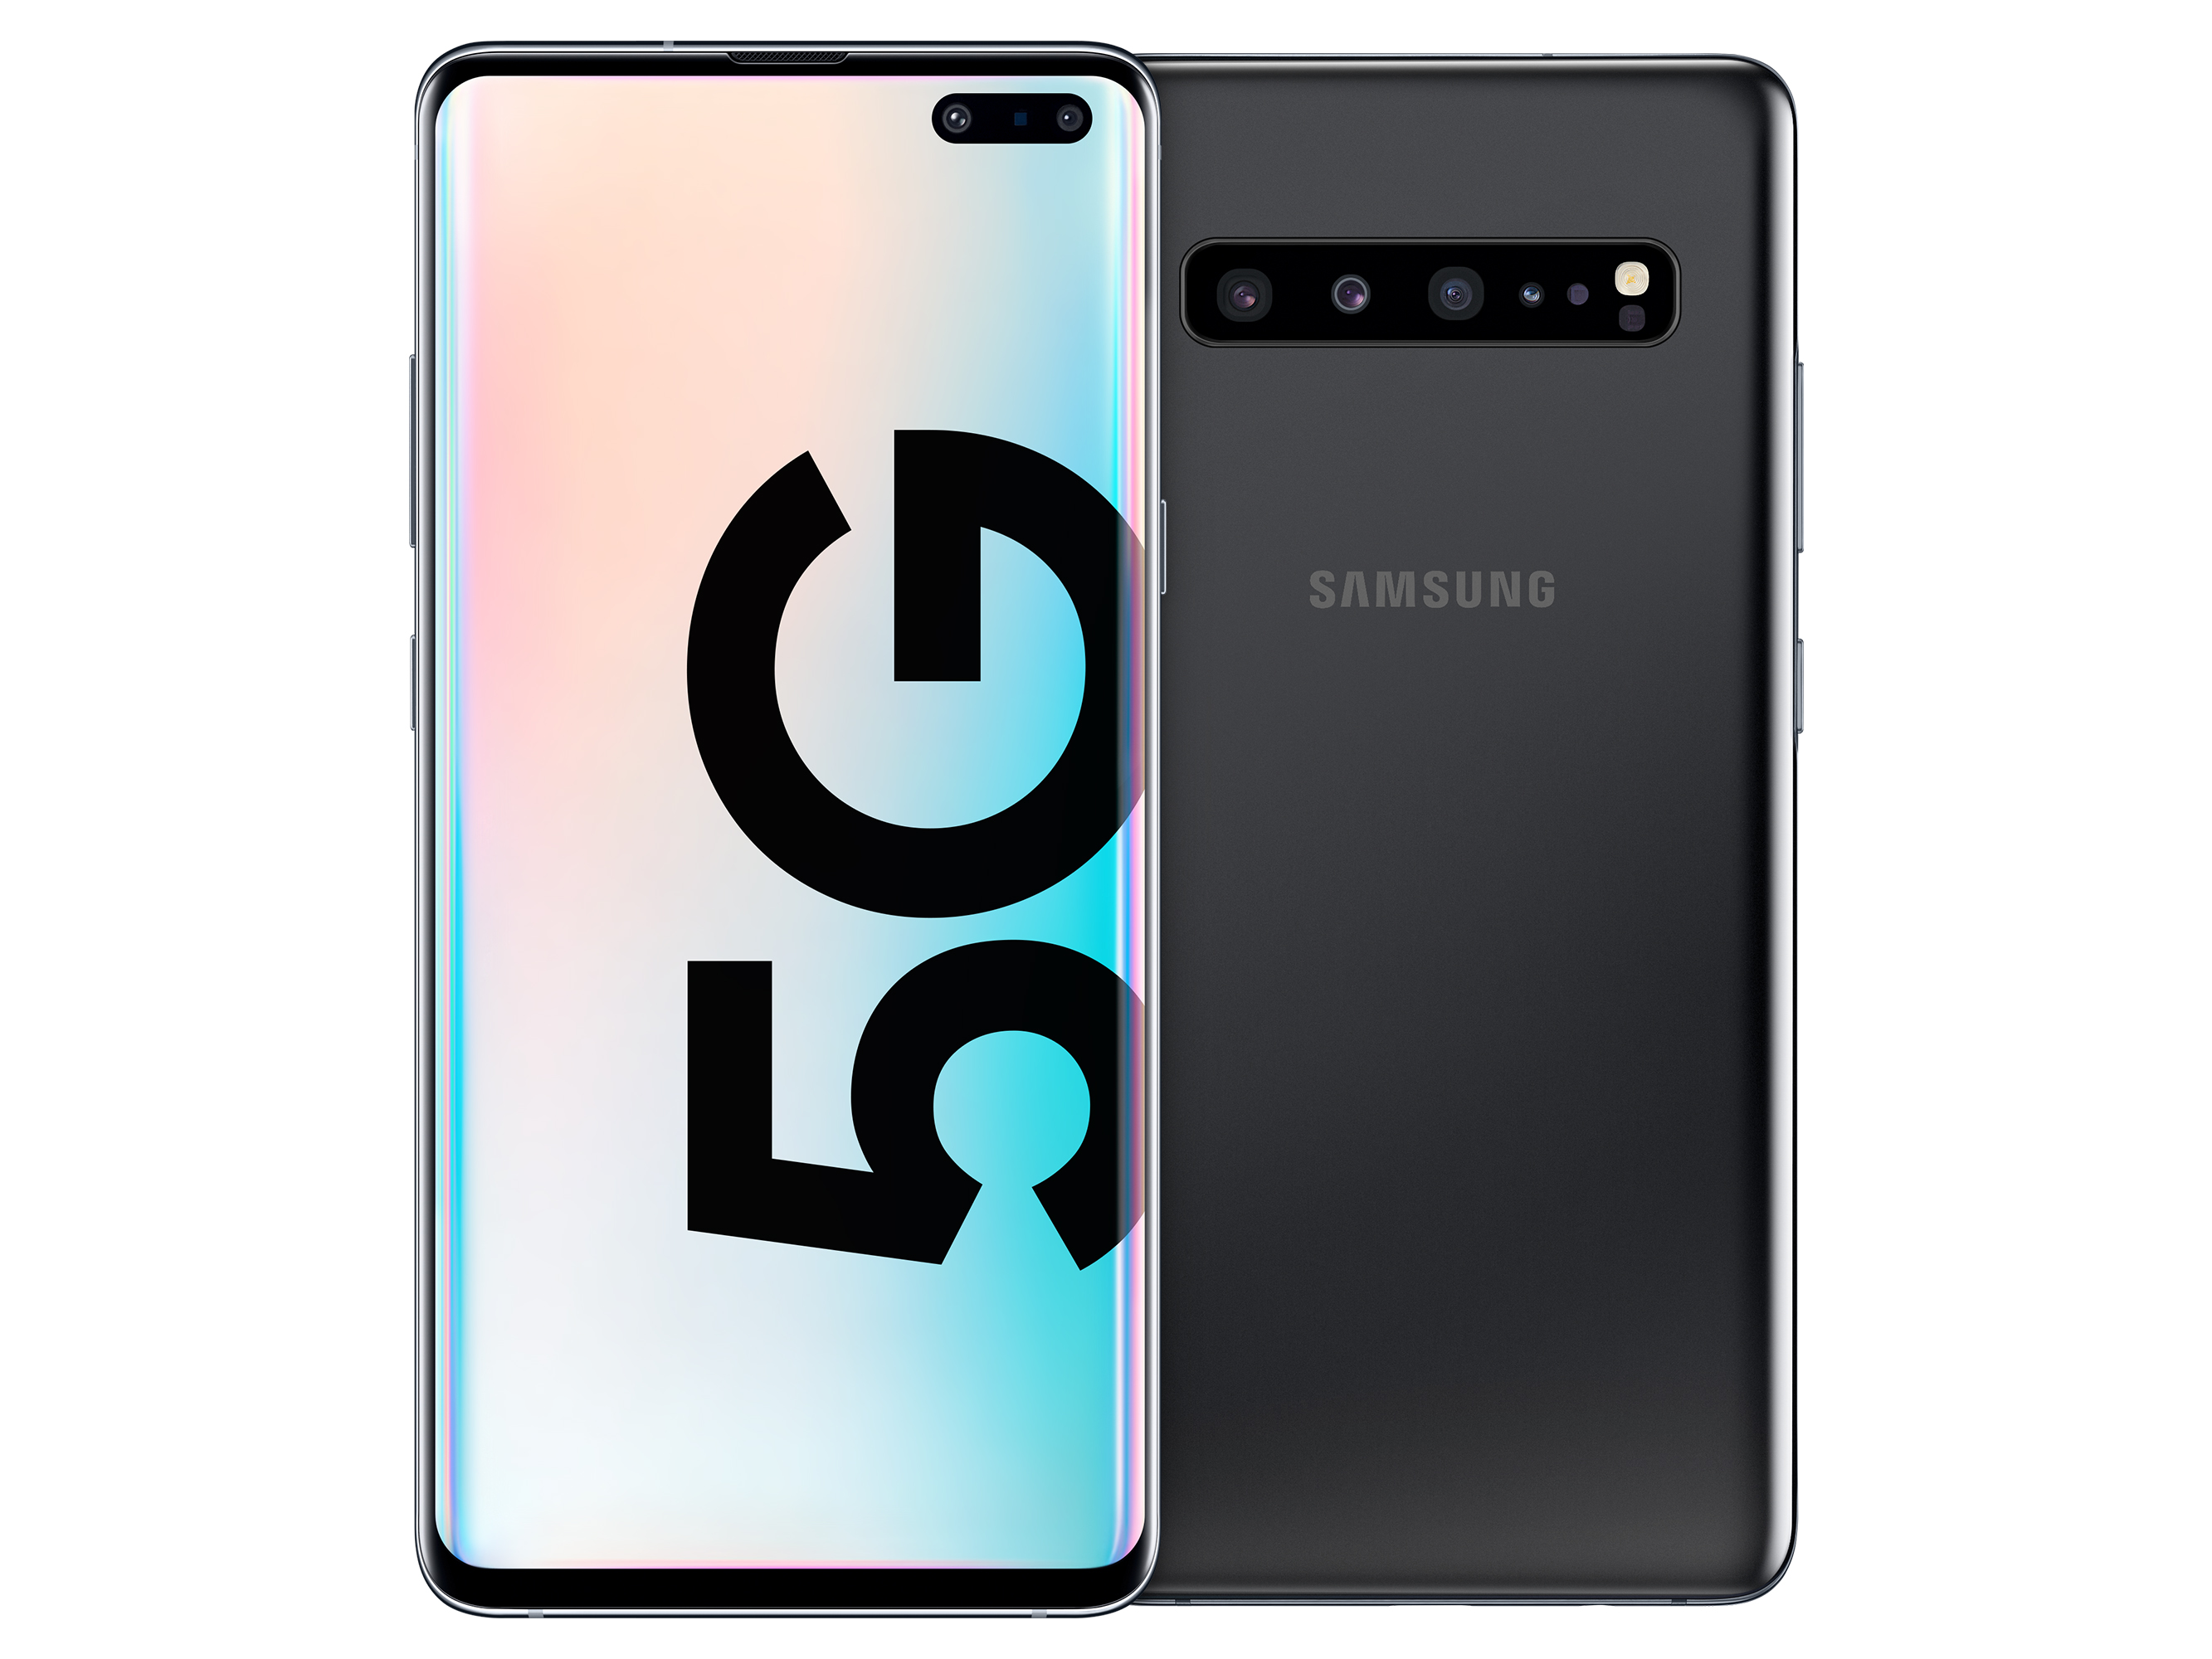 Samsung Galaxy S10 5g Smartphone Review A Turbocharged S10 With A Cutting Edge Addition